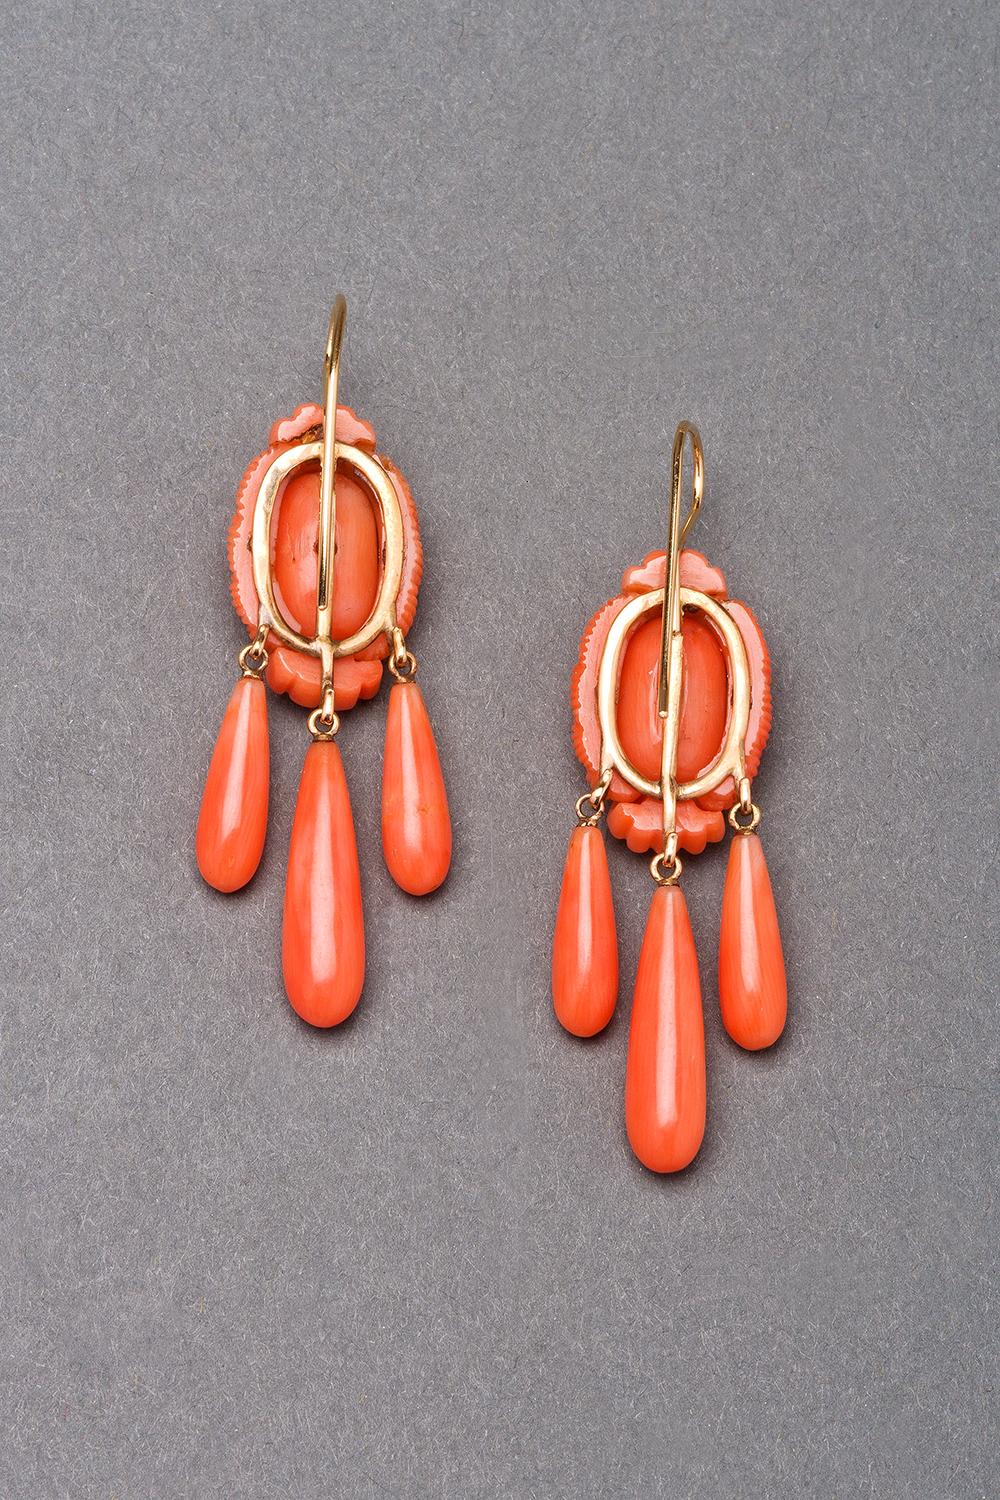 Uncut Victorian Carved Coral Gold Earrings, circa 1870